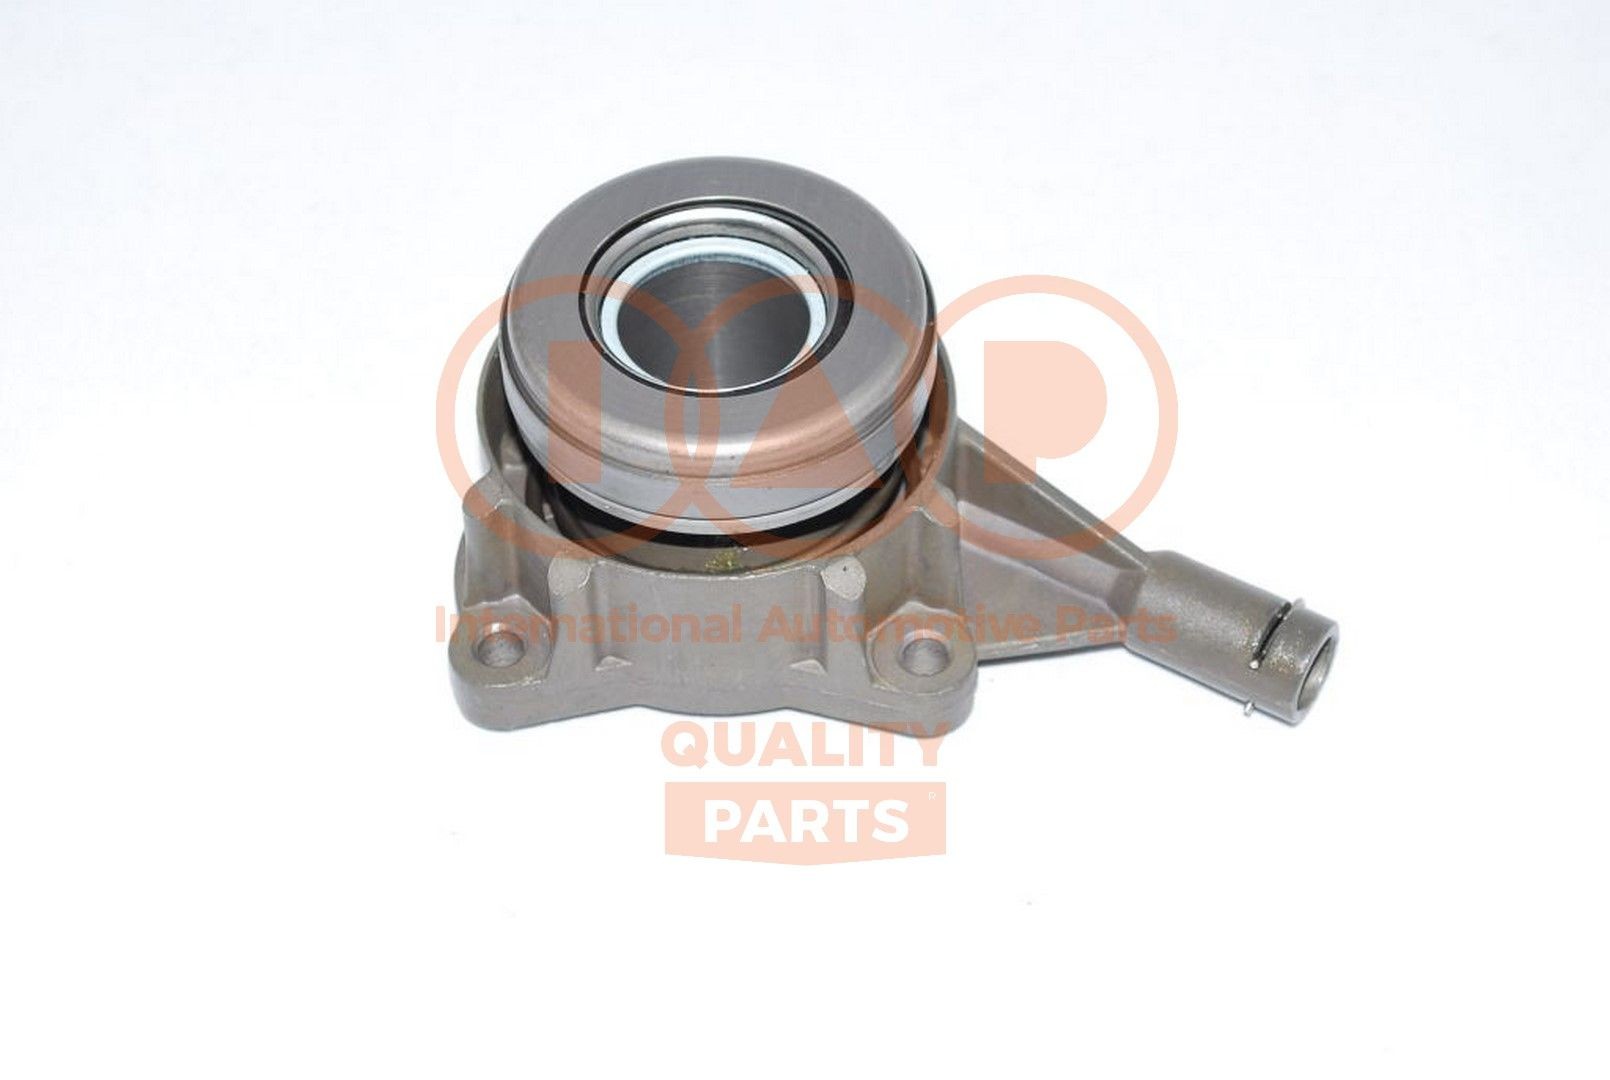 IAP QUALITY PARTS Clutch release bearing 204-14034 Ford TRANSIT 2013